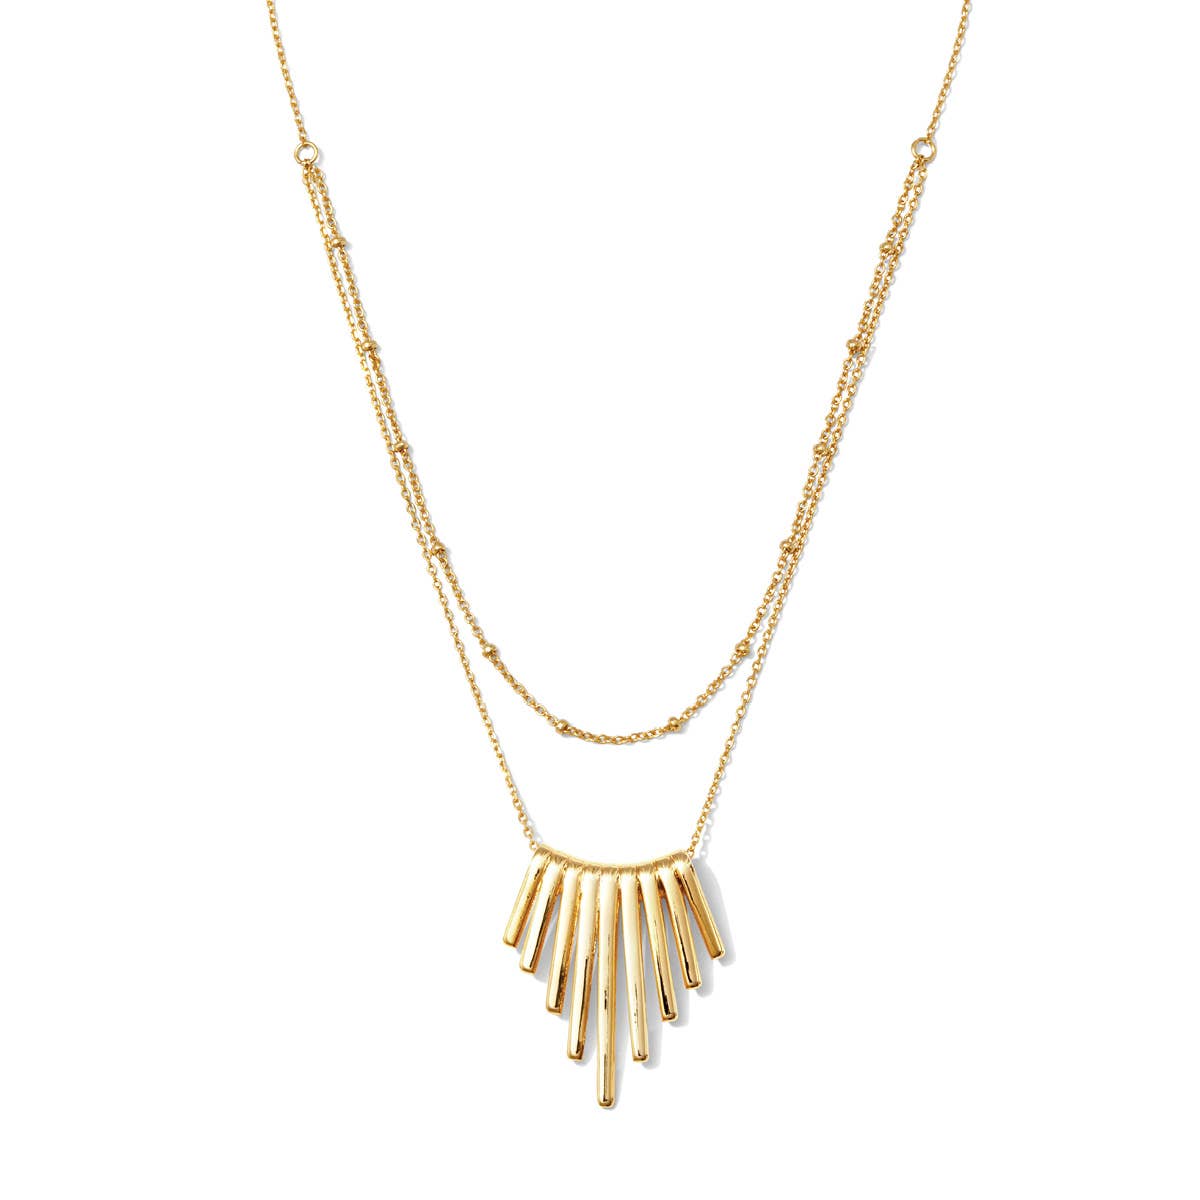 Gold Large Contemporary Pendant Necklace with Chain Layer - Rose Grace Boutique 